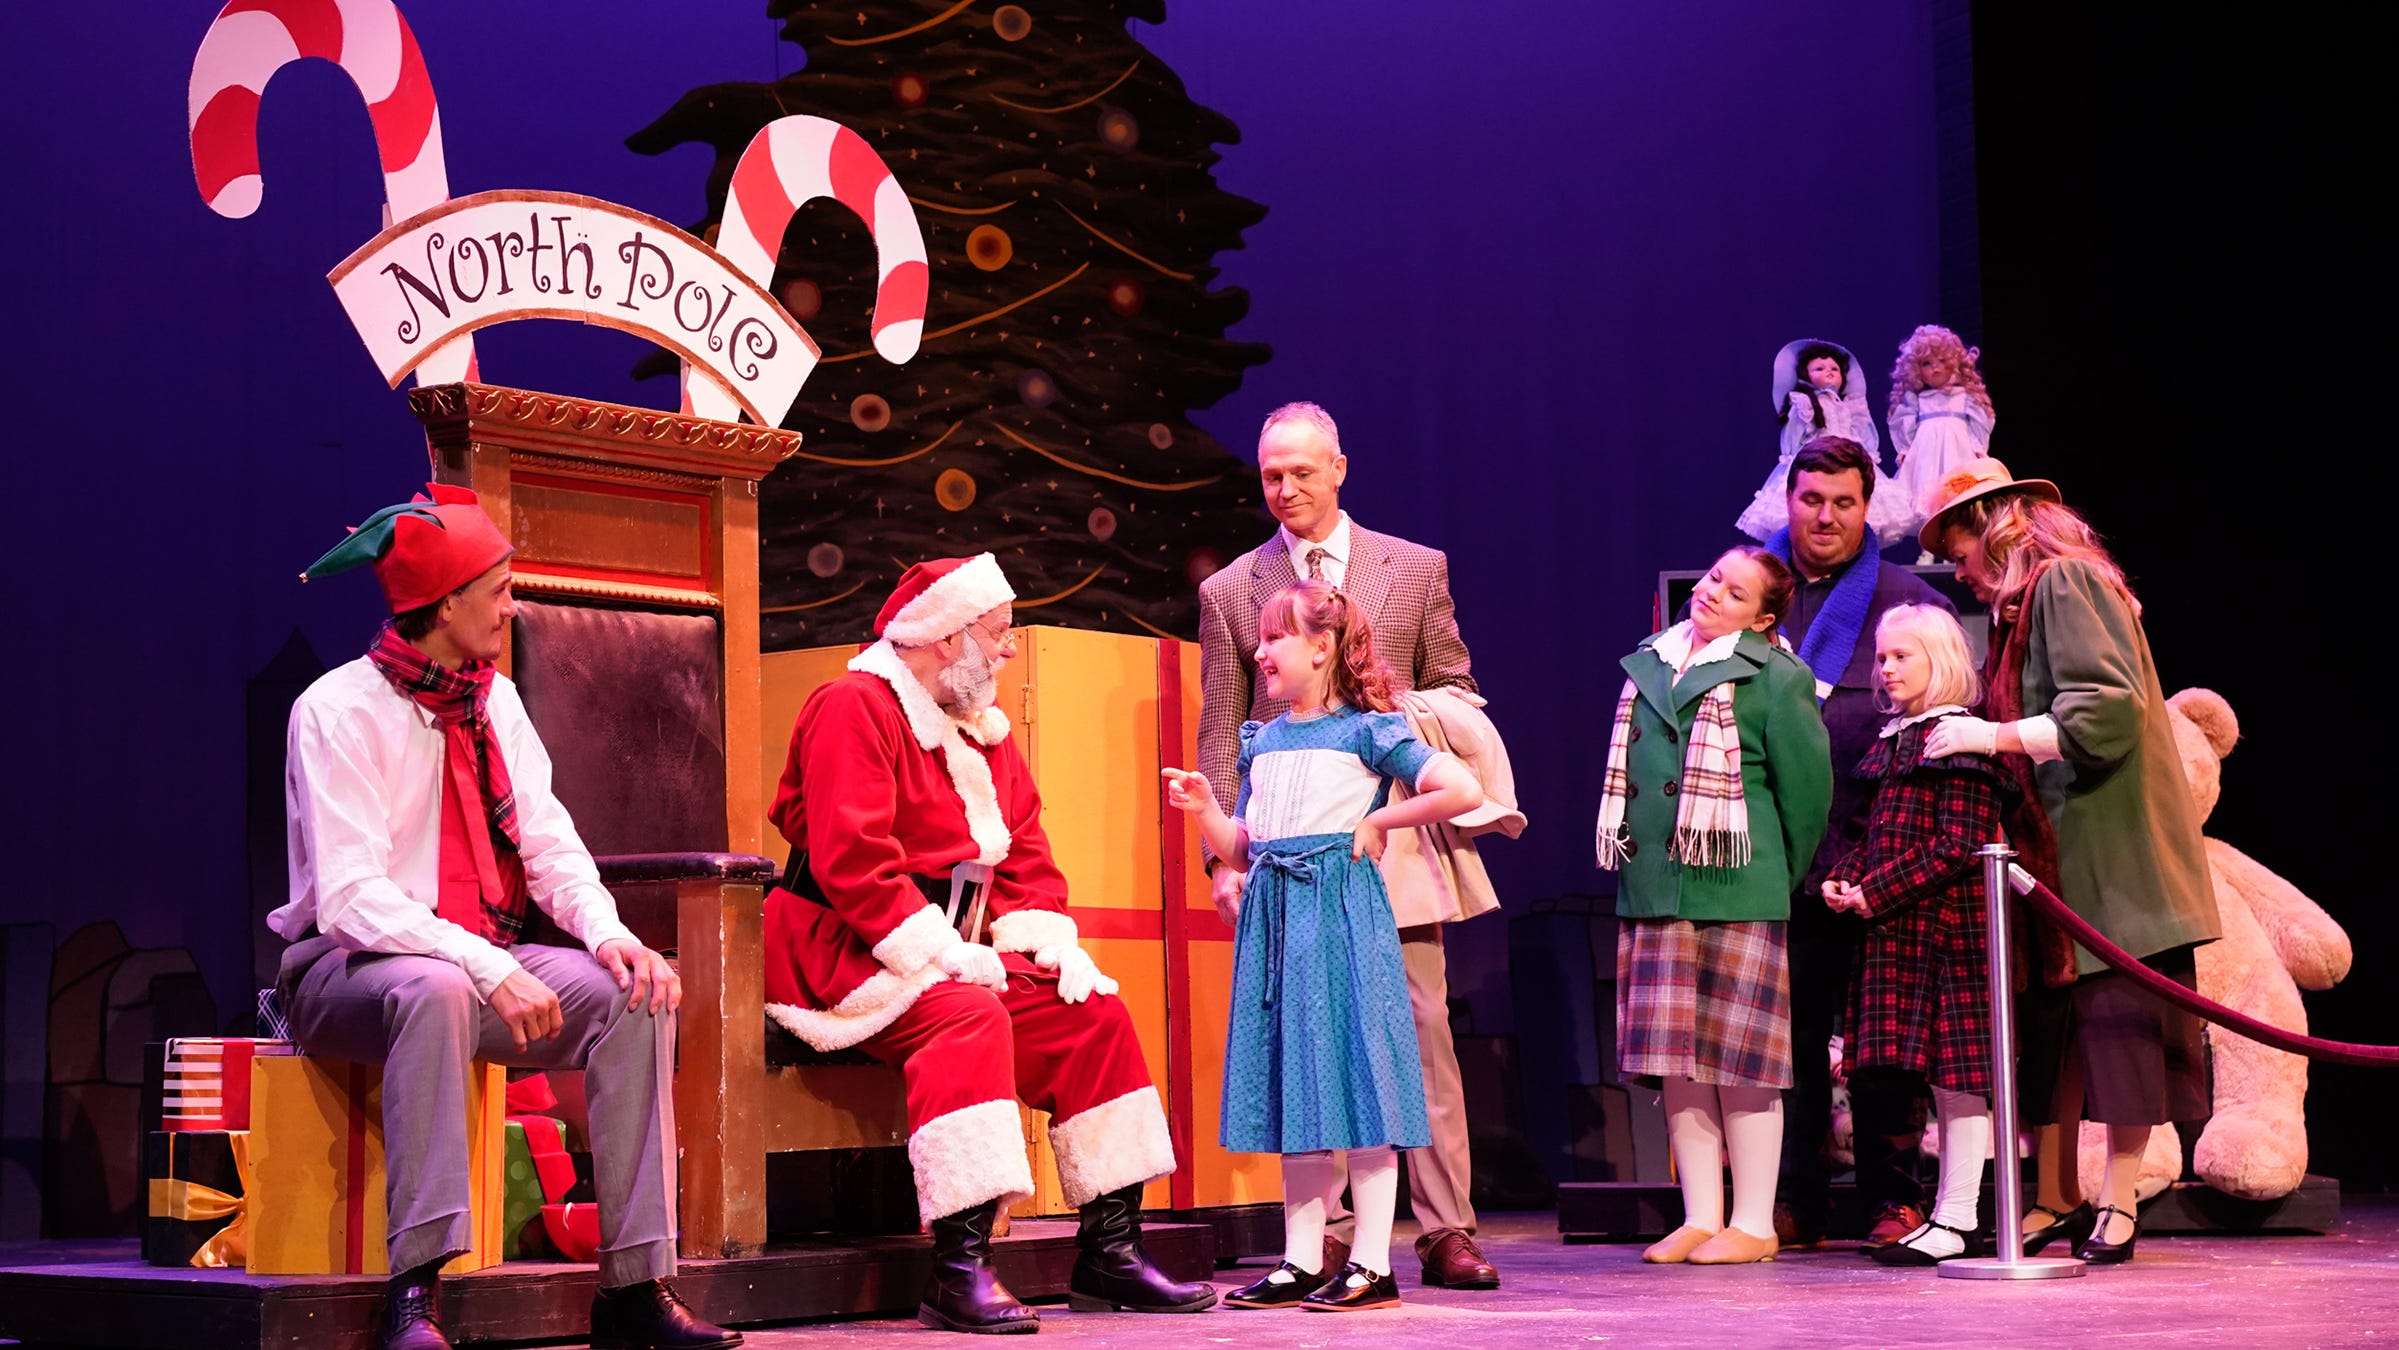   
																Croswell Opera House stages Christmas classic 'Miracle on 34th Street' 
															 